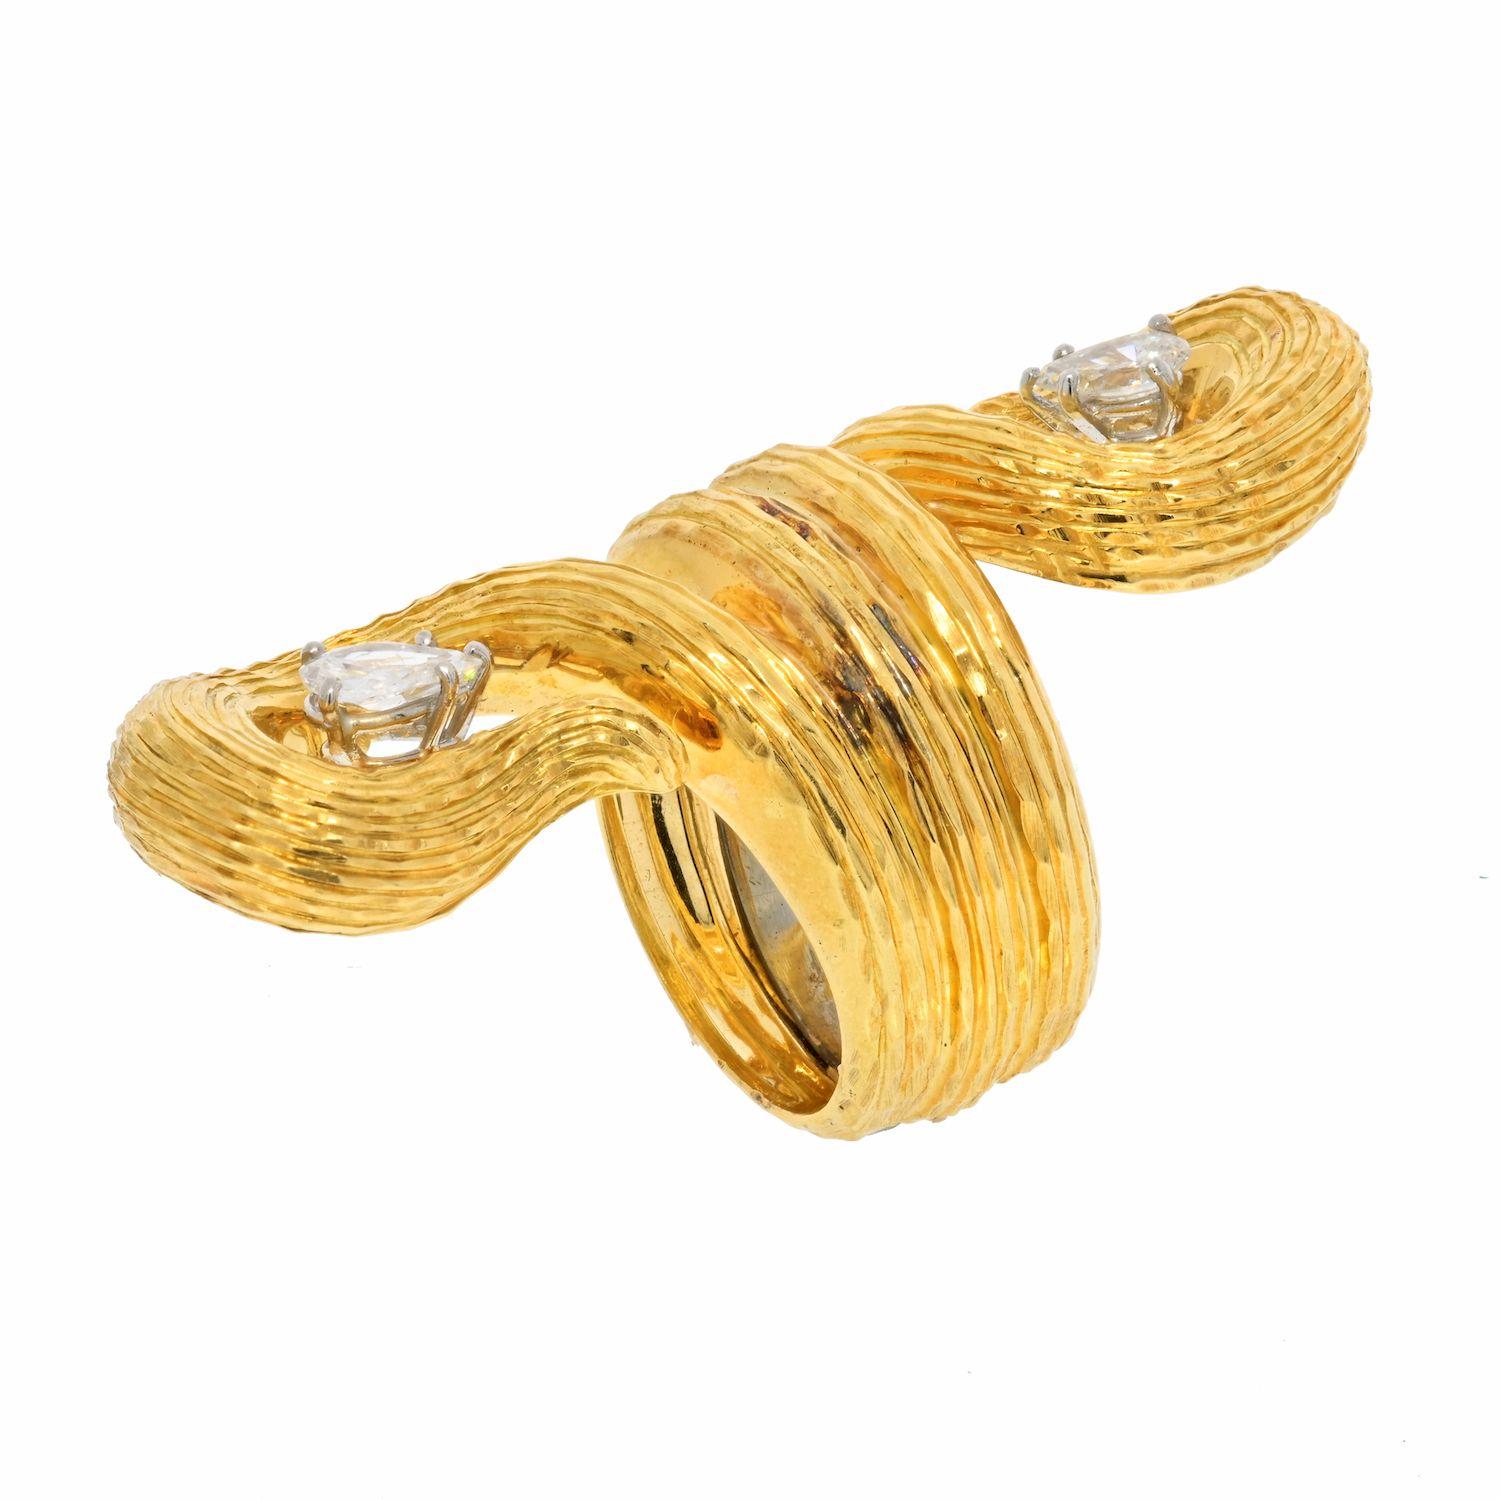 This extravagant designer David Webb diamond cocktail ring is crafted in 18-karat yellow gold weighing 22 grams and measuring 30mm long. Showcasing a bypass design set with a pair of centered, prong set, pear-cut diamonds. Both weighing